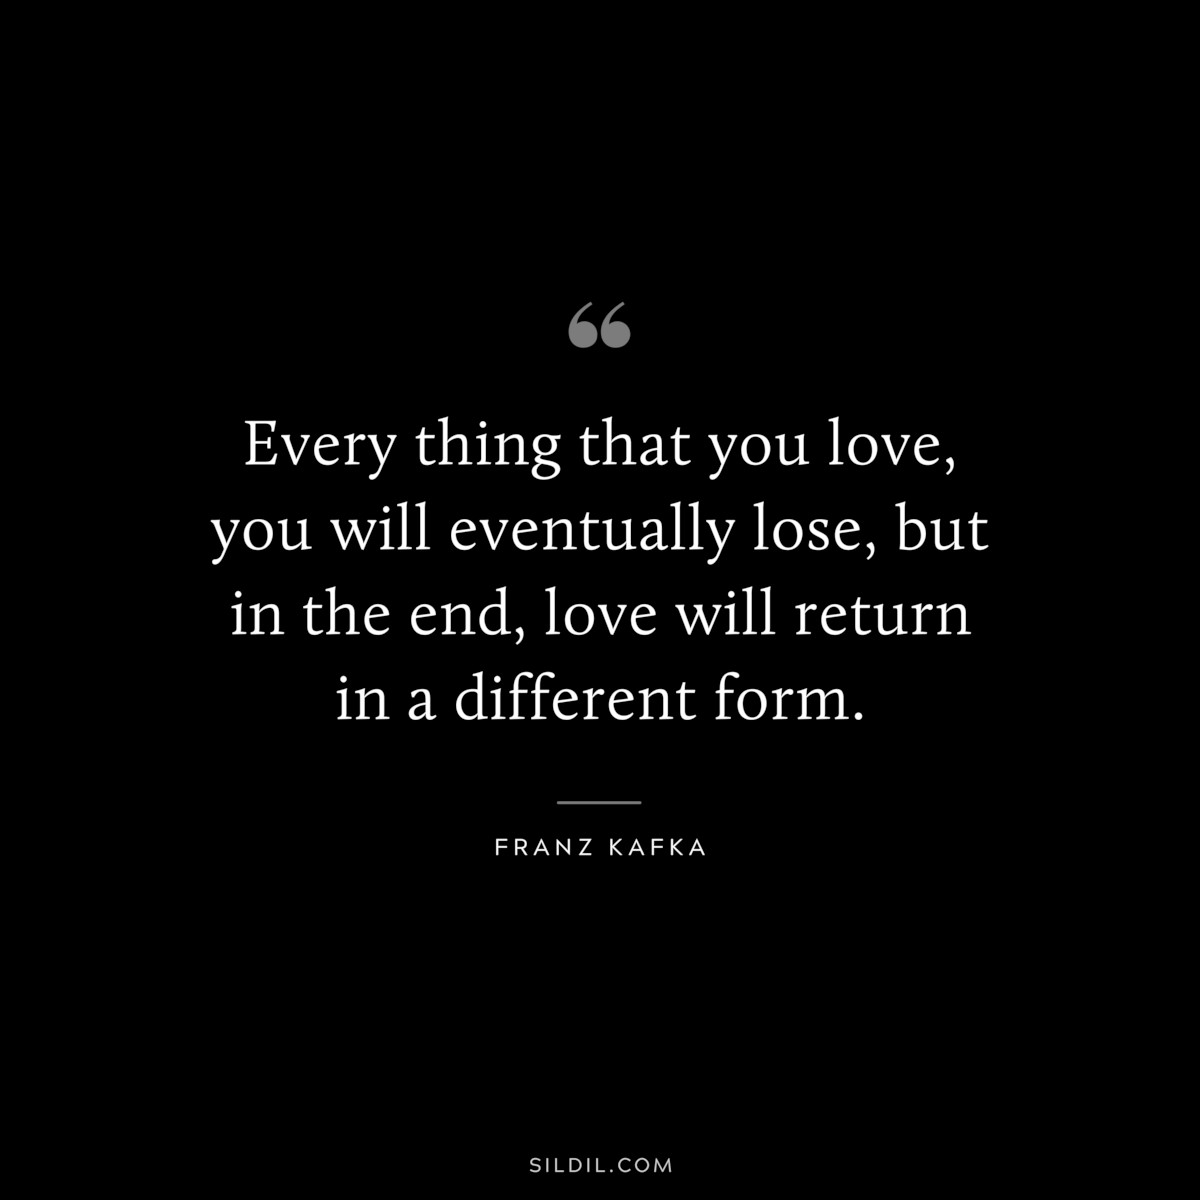 Every thing that you love, you will eventually lose, but in the end, love will return in a different form. ― Franz Kafka